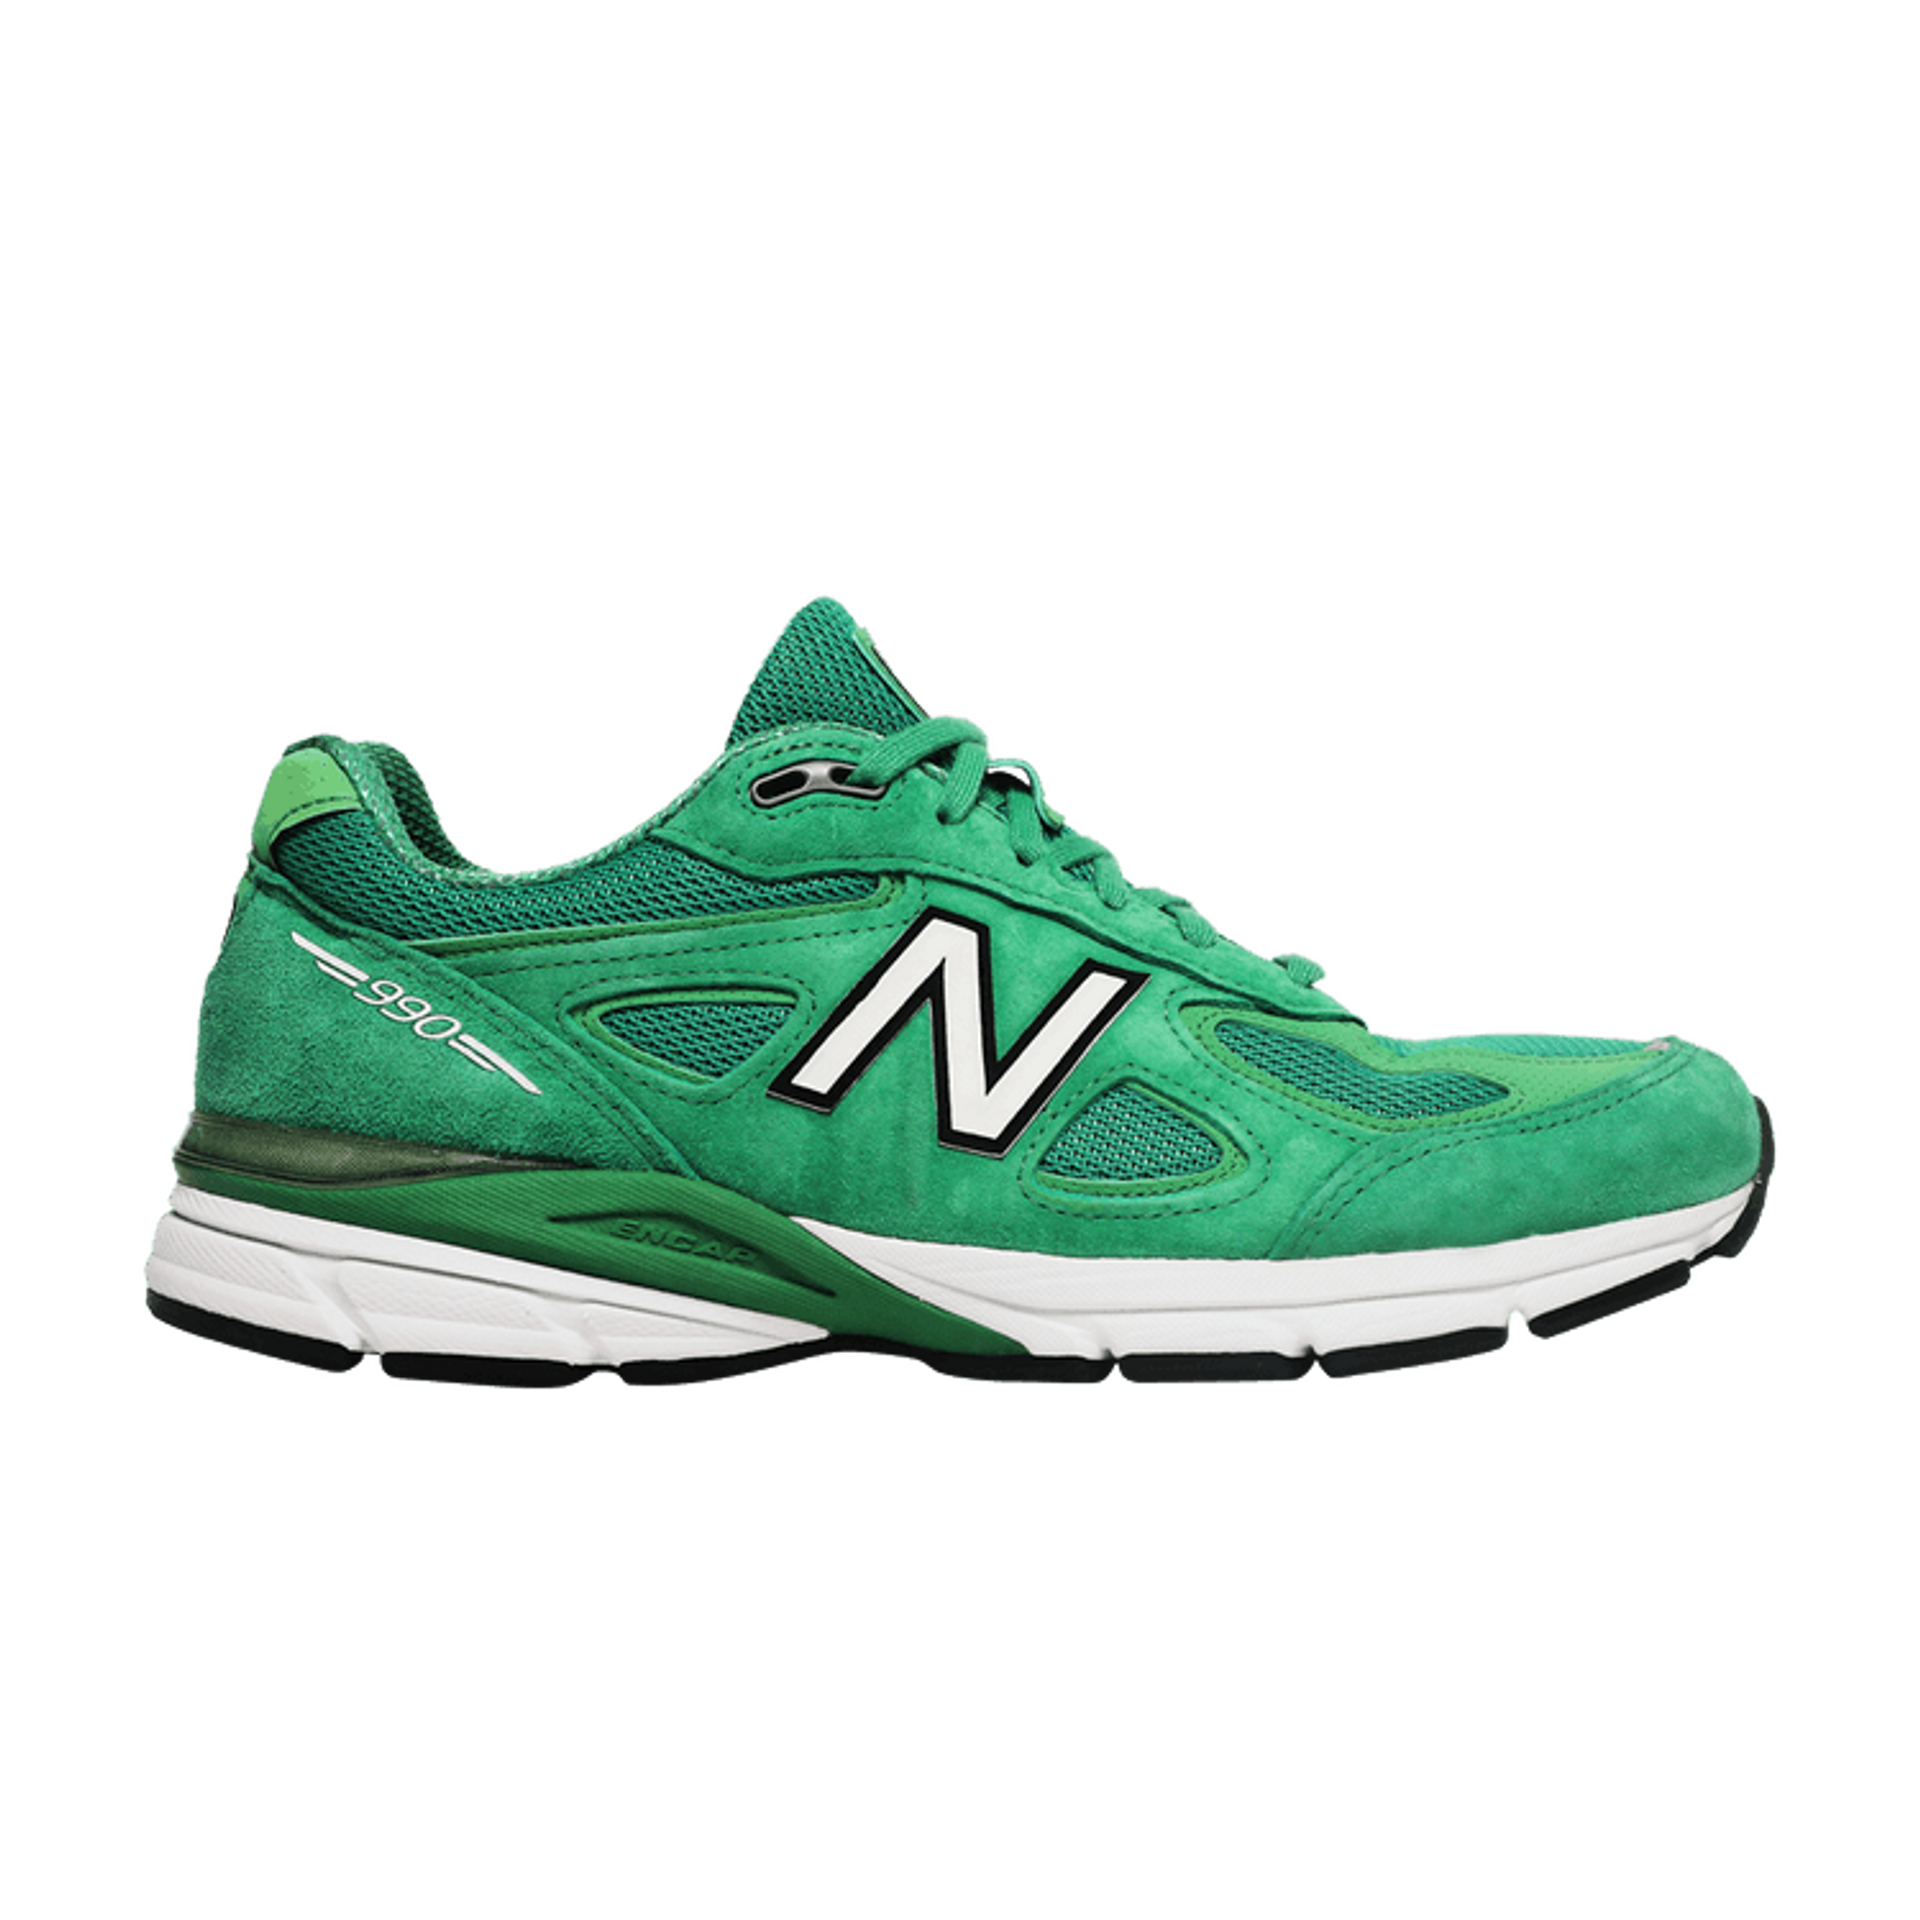 990v4 Made in USA 'New Green'